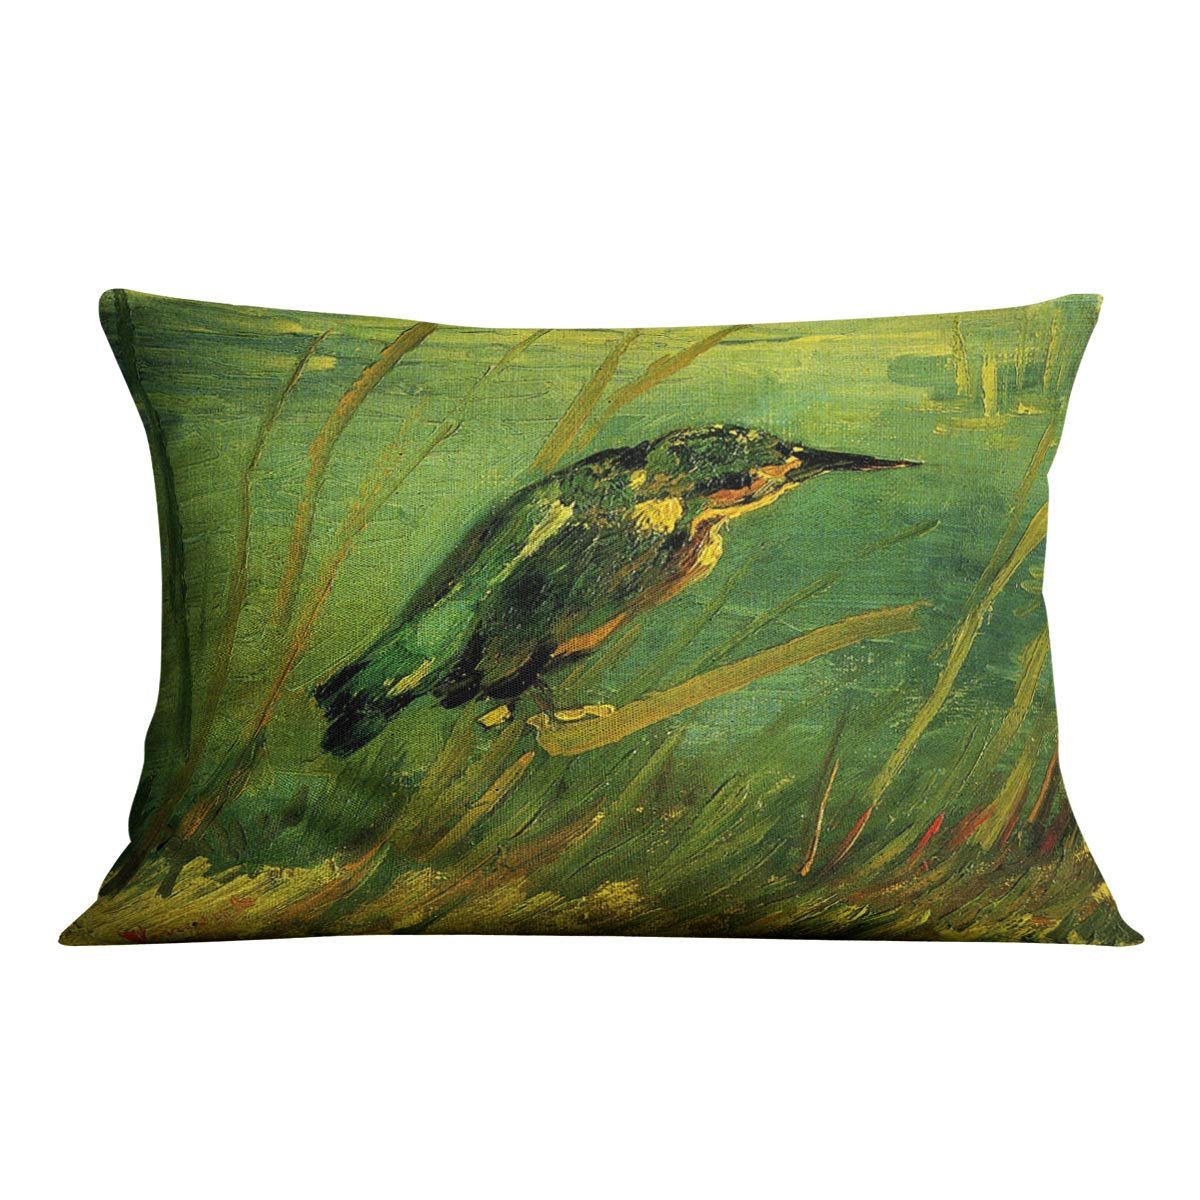 The Kingfisher by Van Gogh Throw Pillow